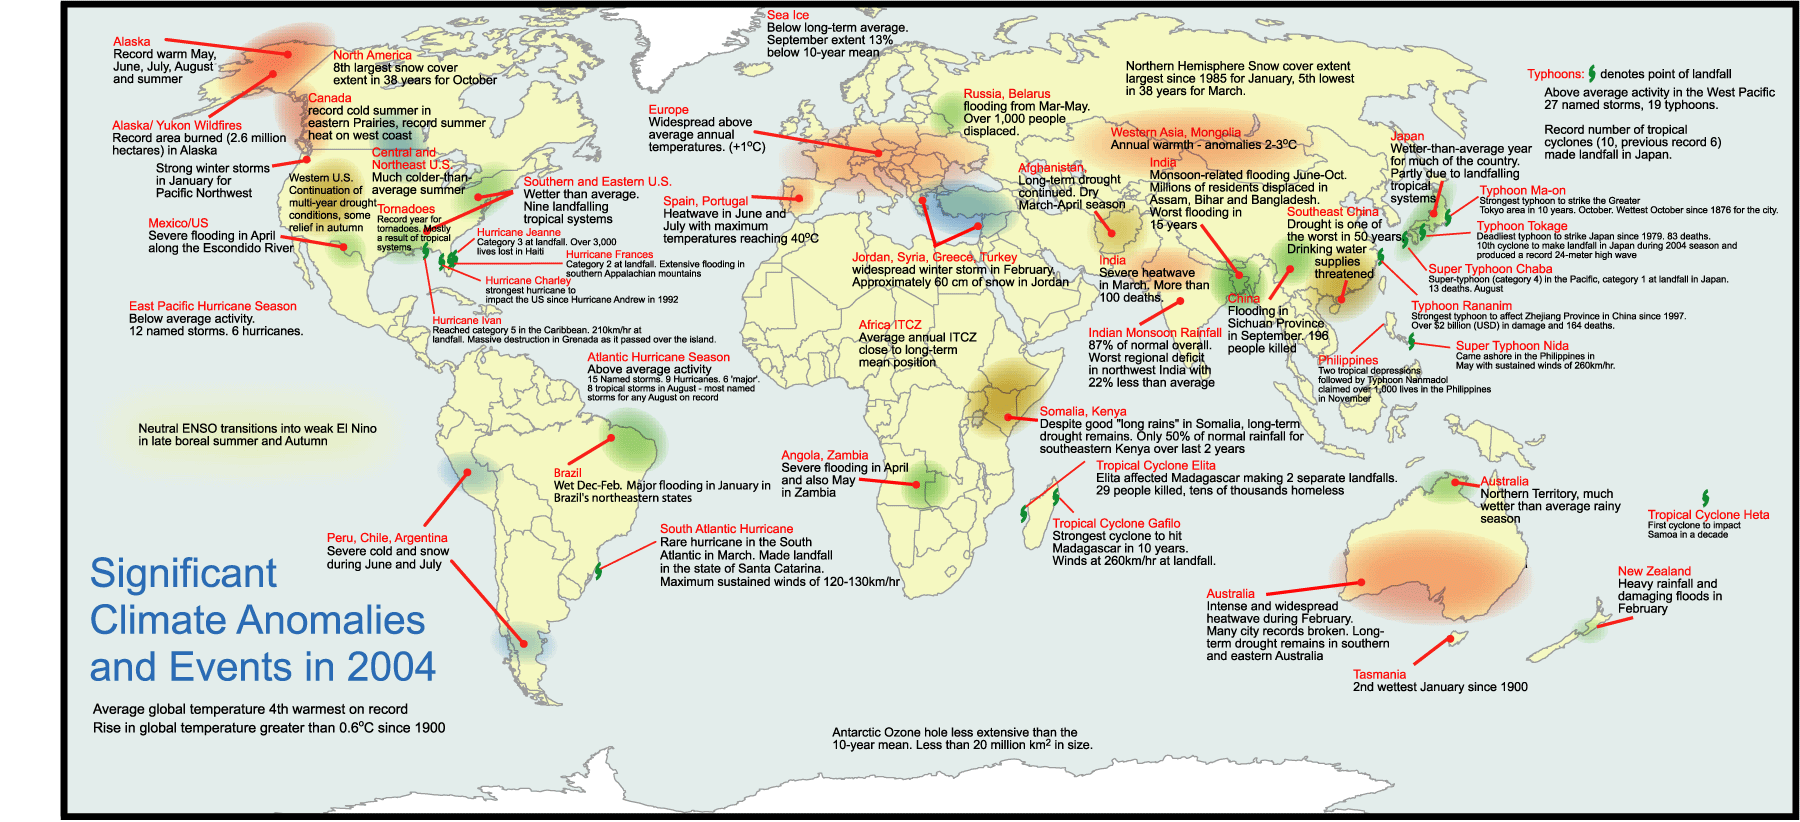 Significant Climate Anomalies and Events in 2004